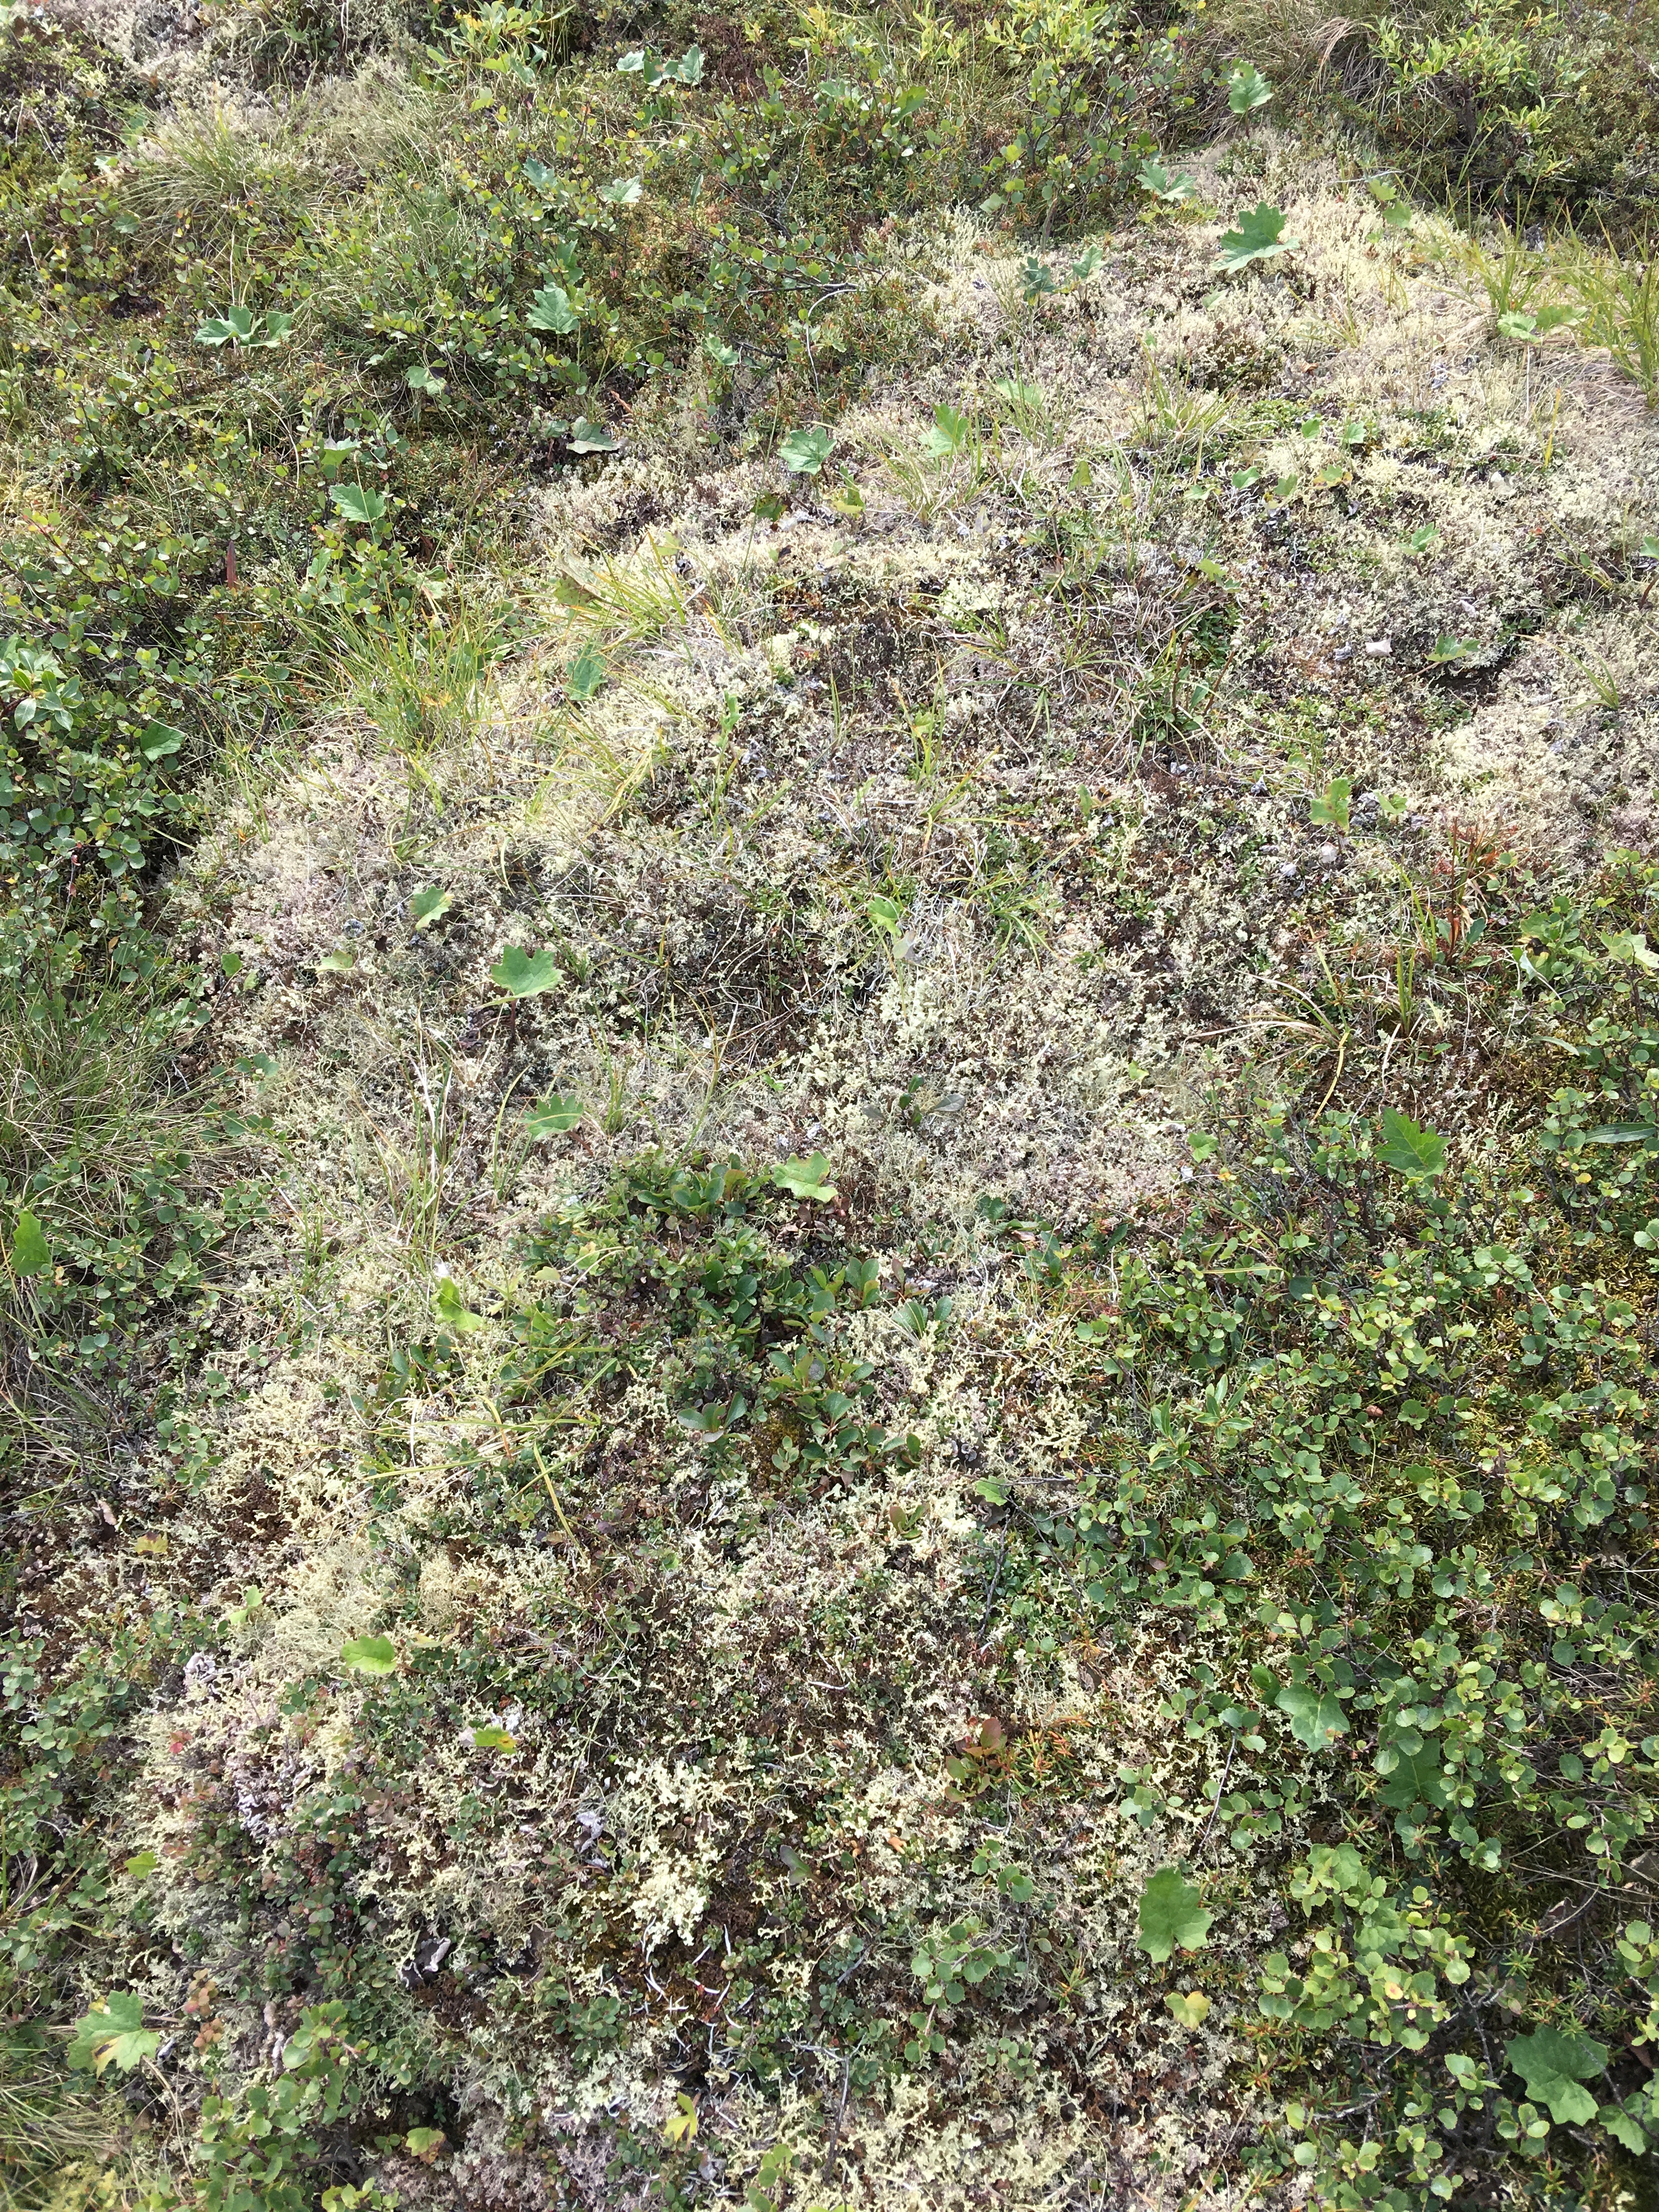 A close-up of vegetation over an area of thawing permafrost.